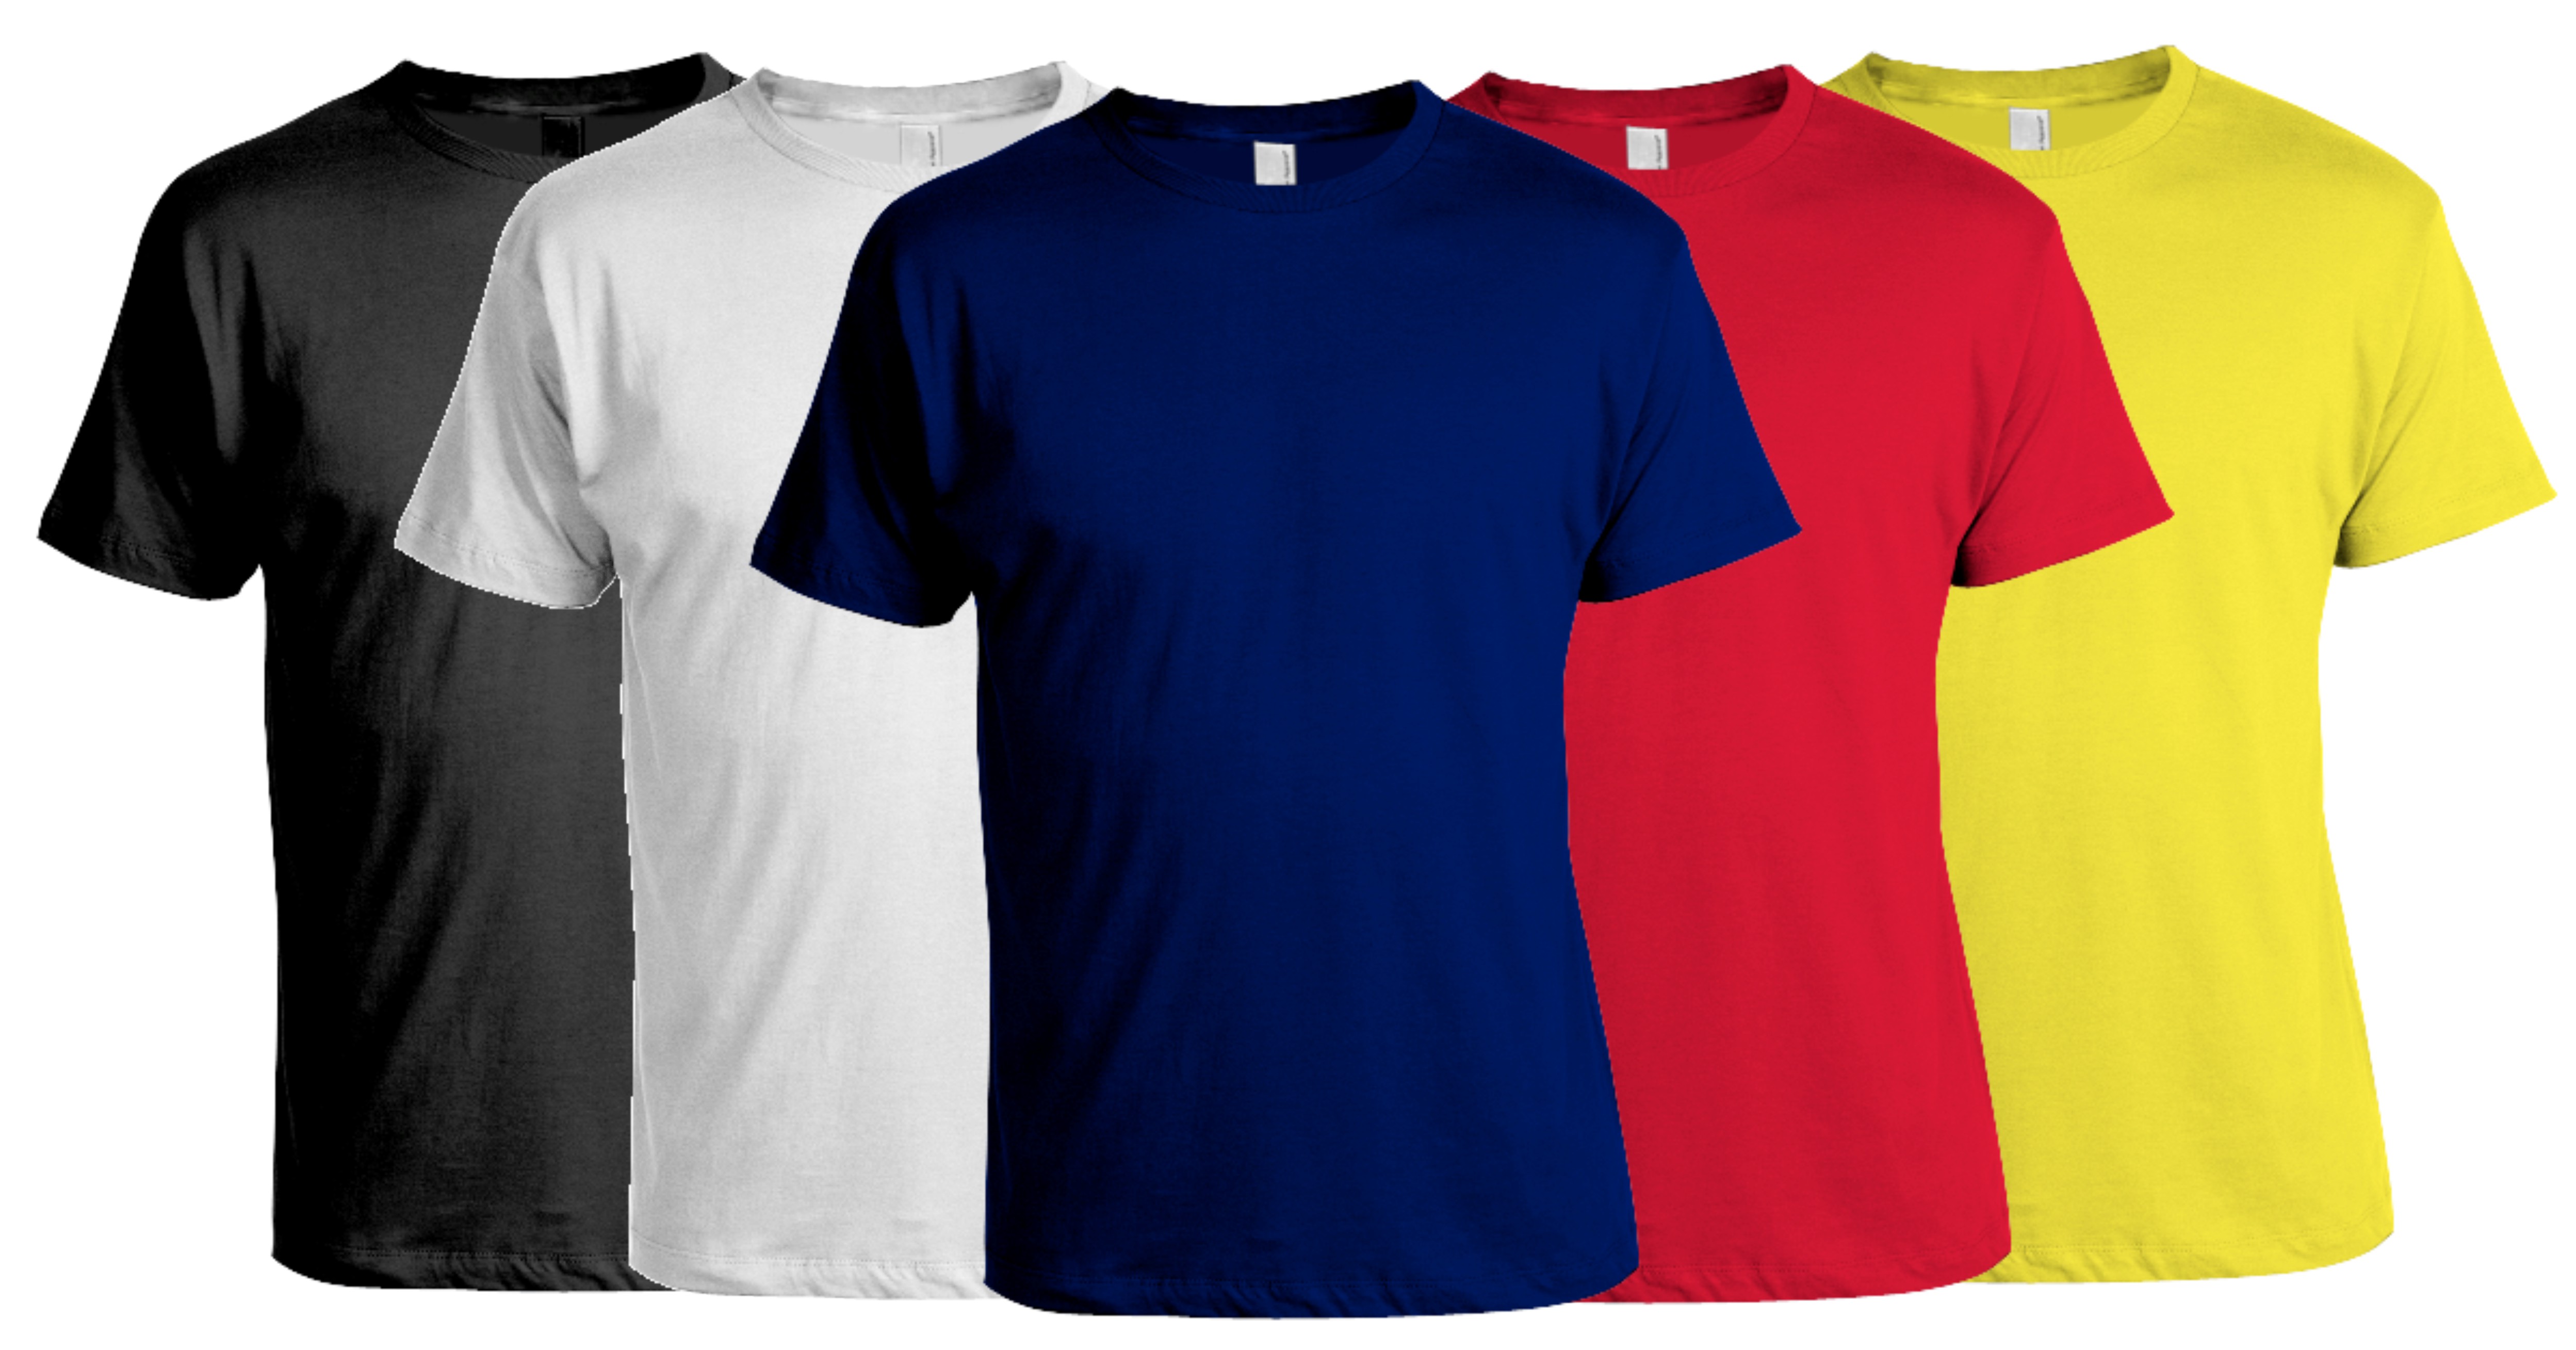 COMBO PACK OF 5 T-SHIRTS BUY Products Online at Best Prices in India